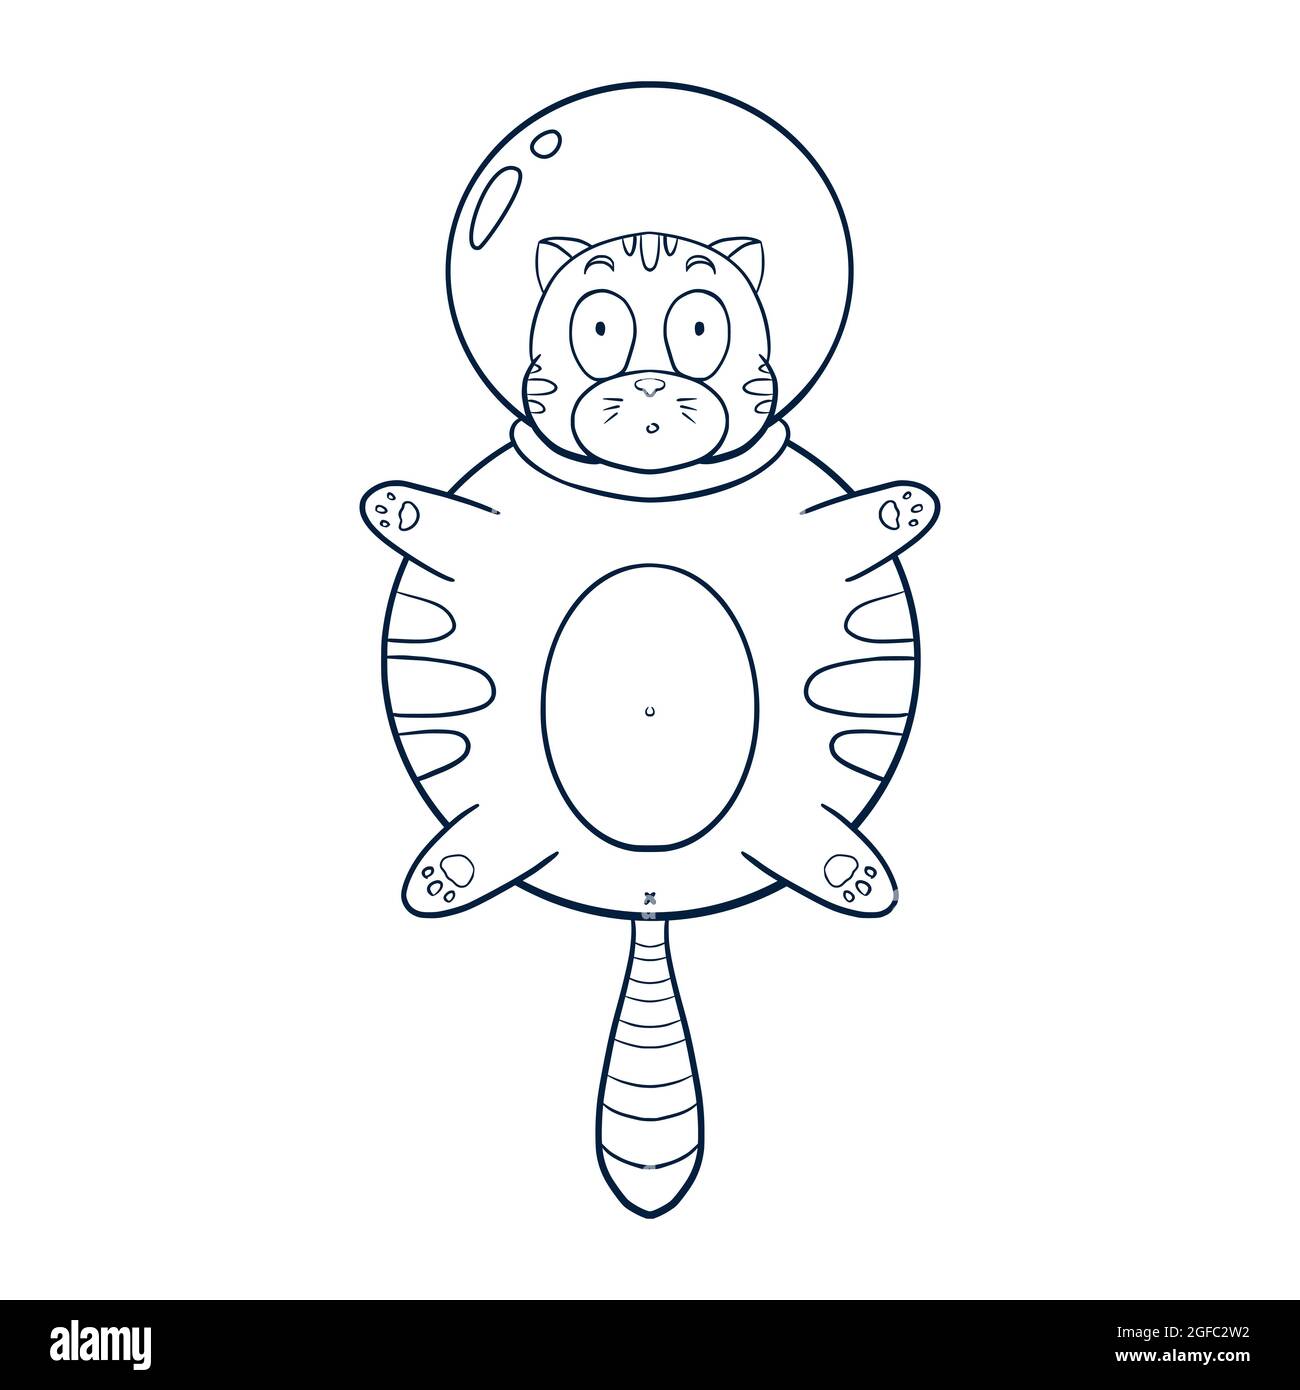 Line Art Cosmic Cat Illustration. Funny animal astronaut sketch for logo, kids graphic tees, prints, stickers, coloring book and nursery decor Stock Vector